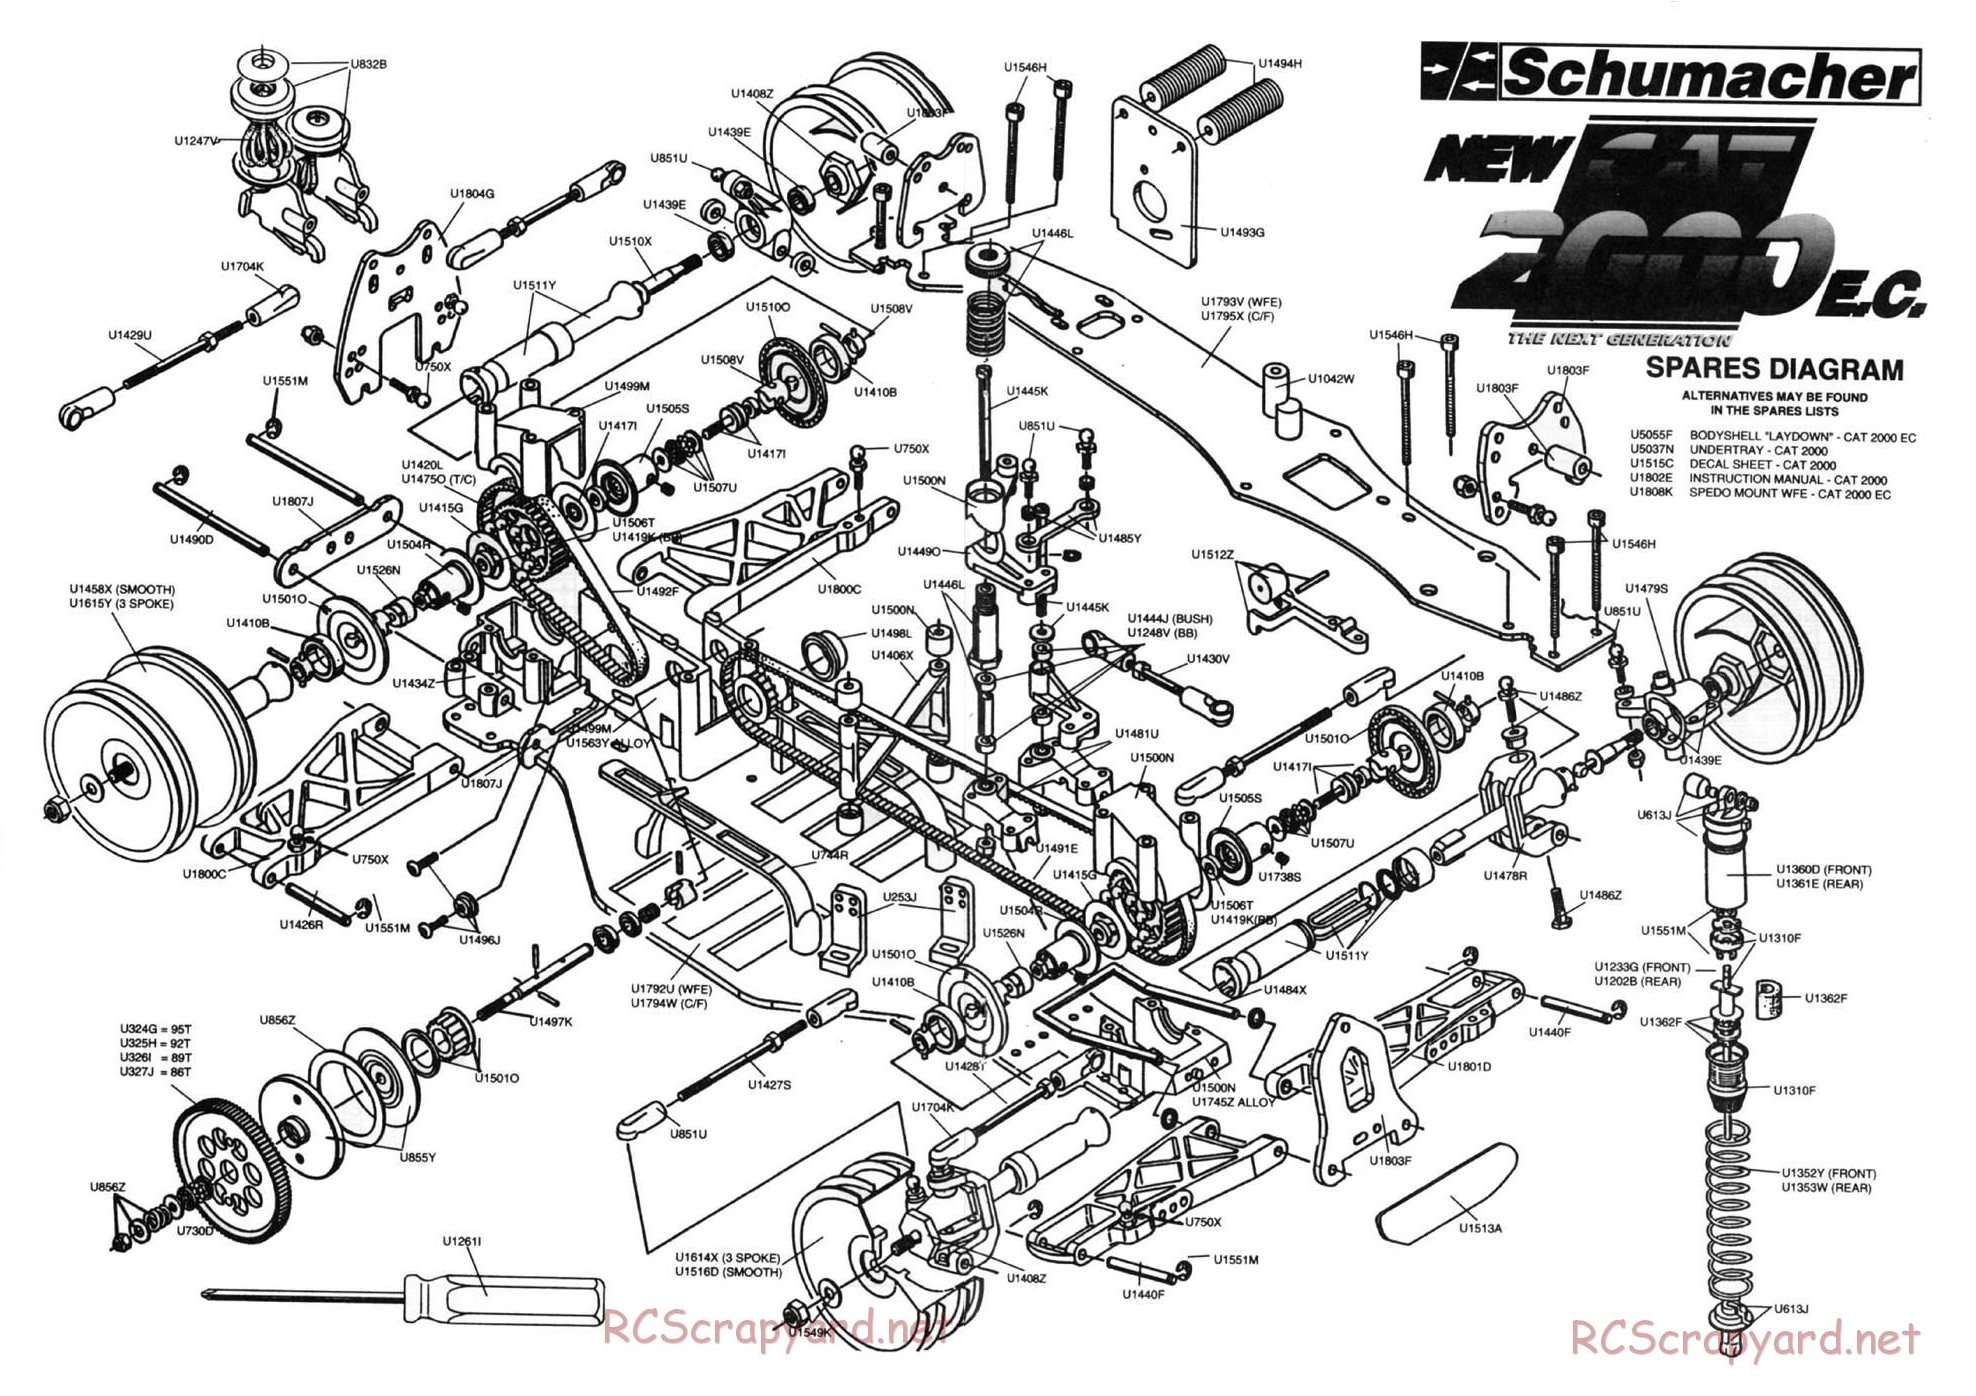 Schumacher - Cat 2000 EC - Exploded View - Page 1